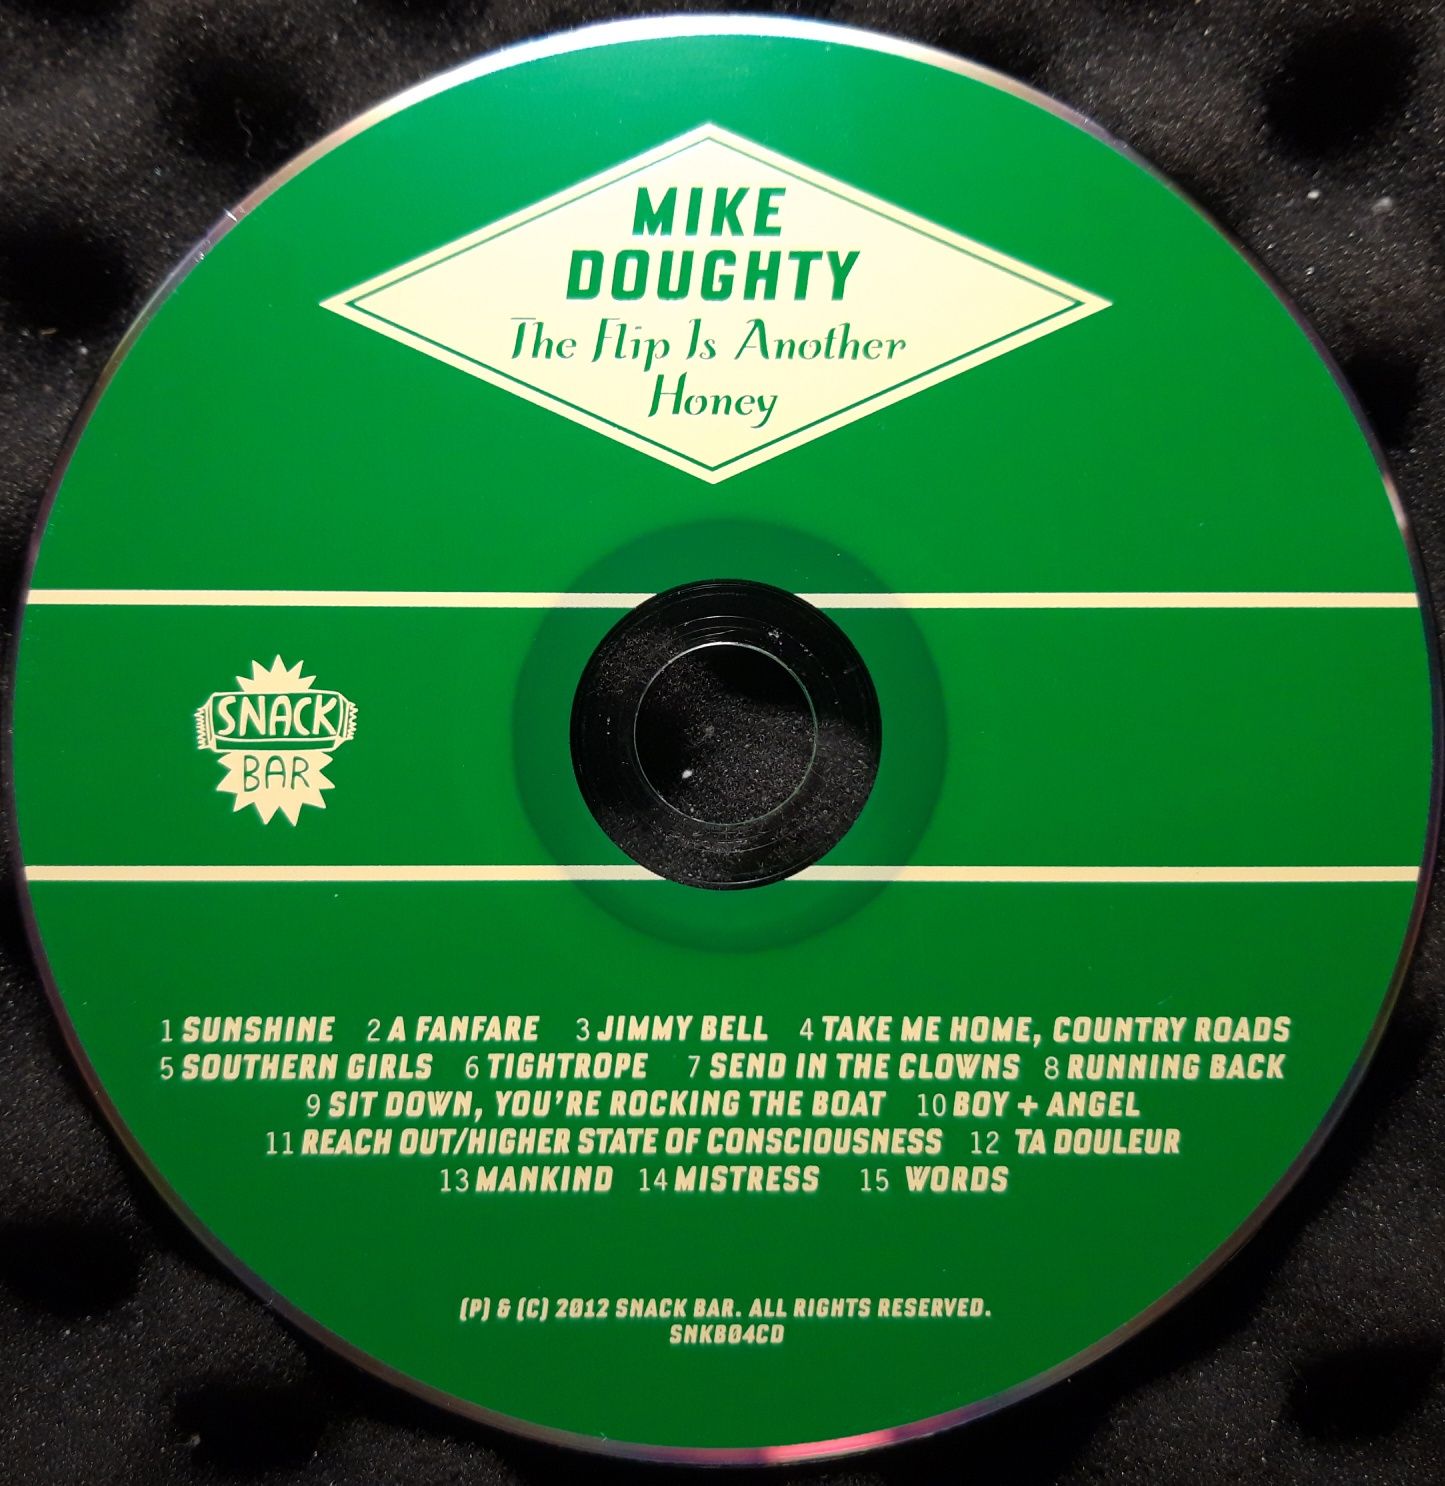 Mike Doughty – The Flip Is Another Honey (CD, 2012)